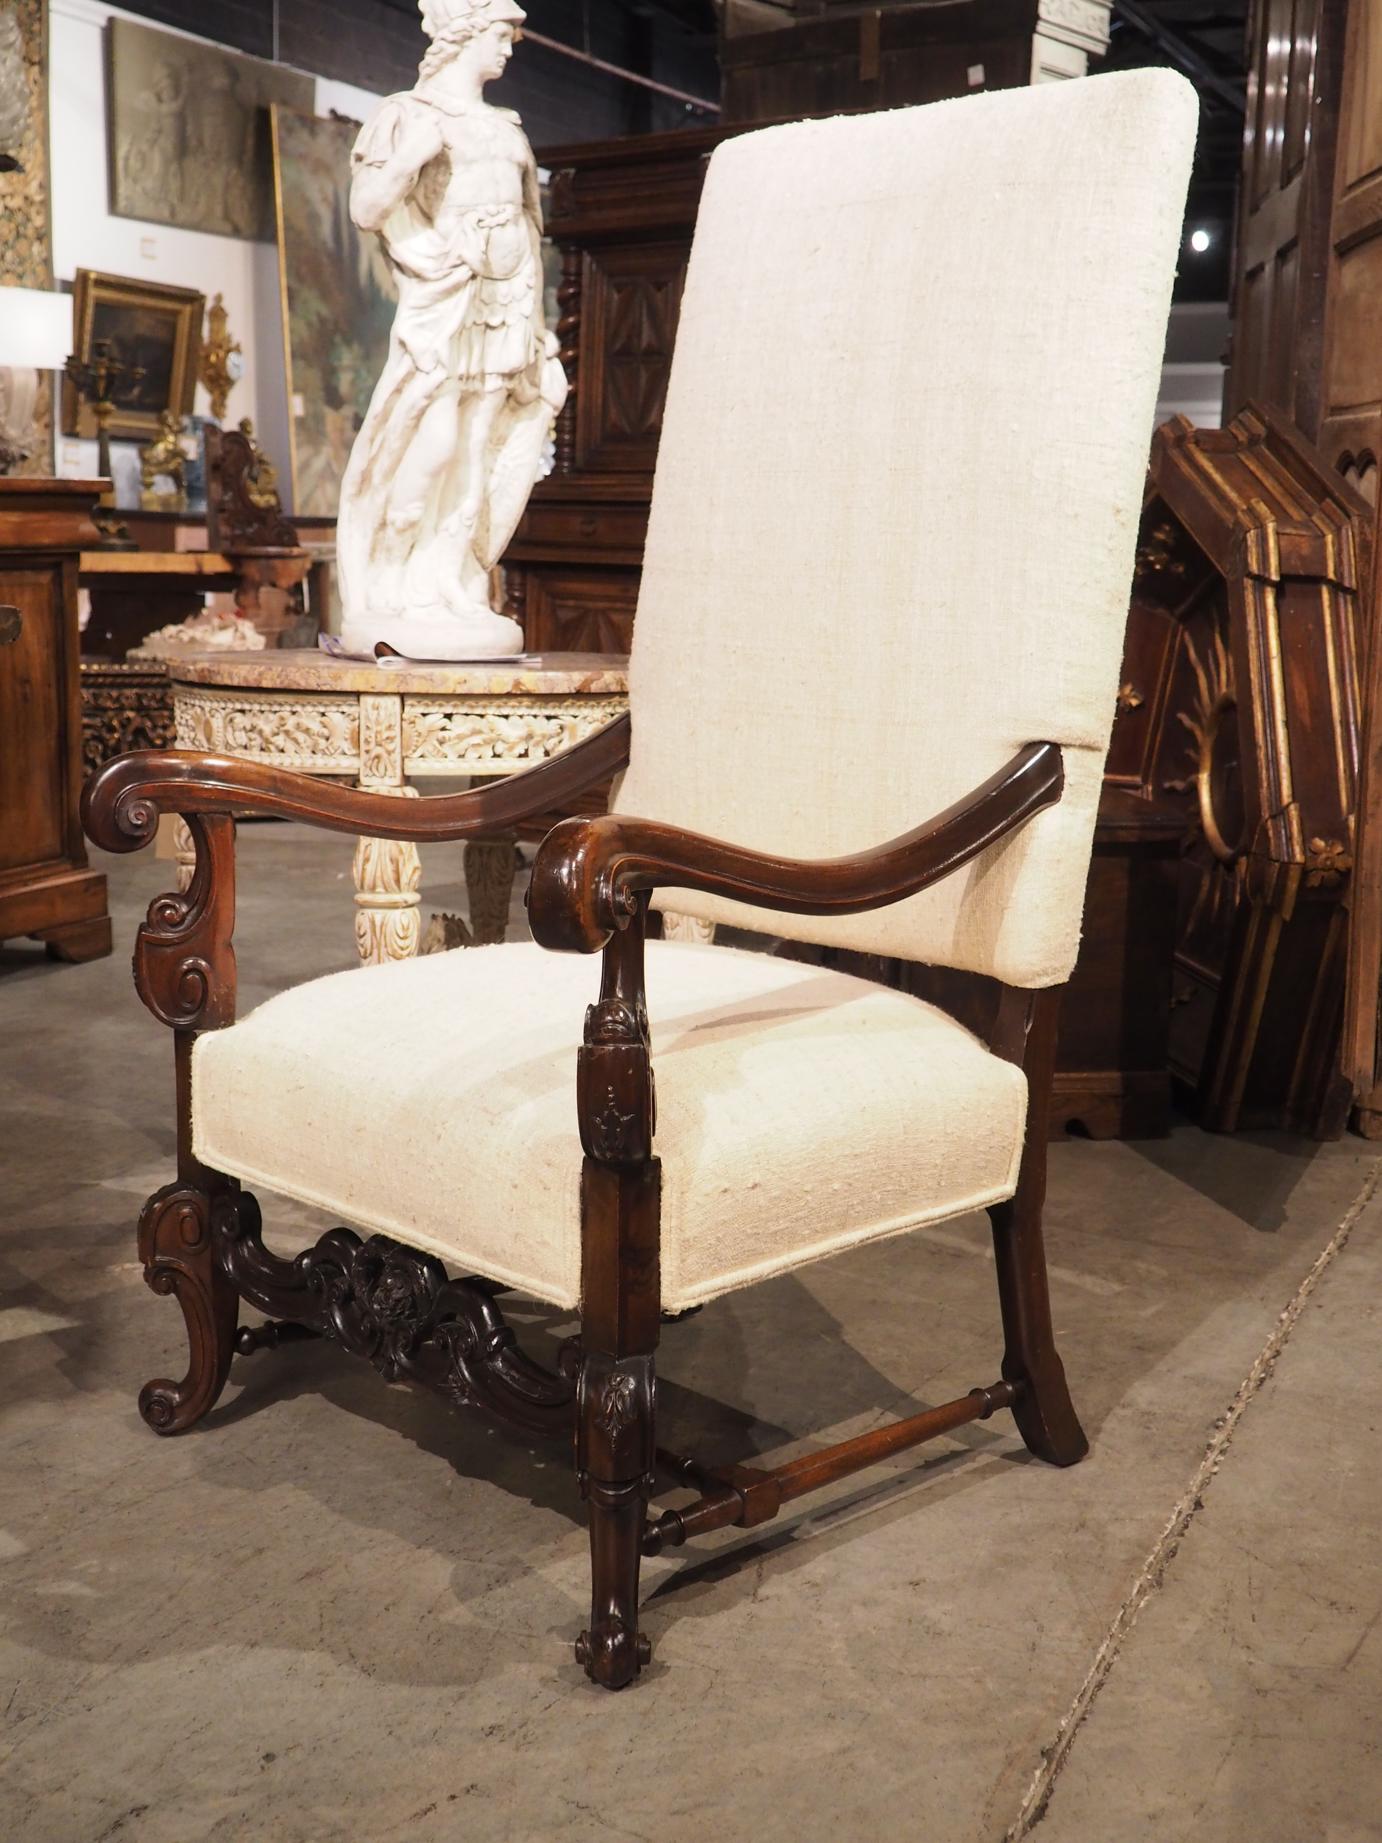 Pair Louis XV-Style Arm Chairs in Walnut with Carved Cartouche